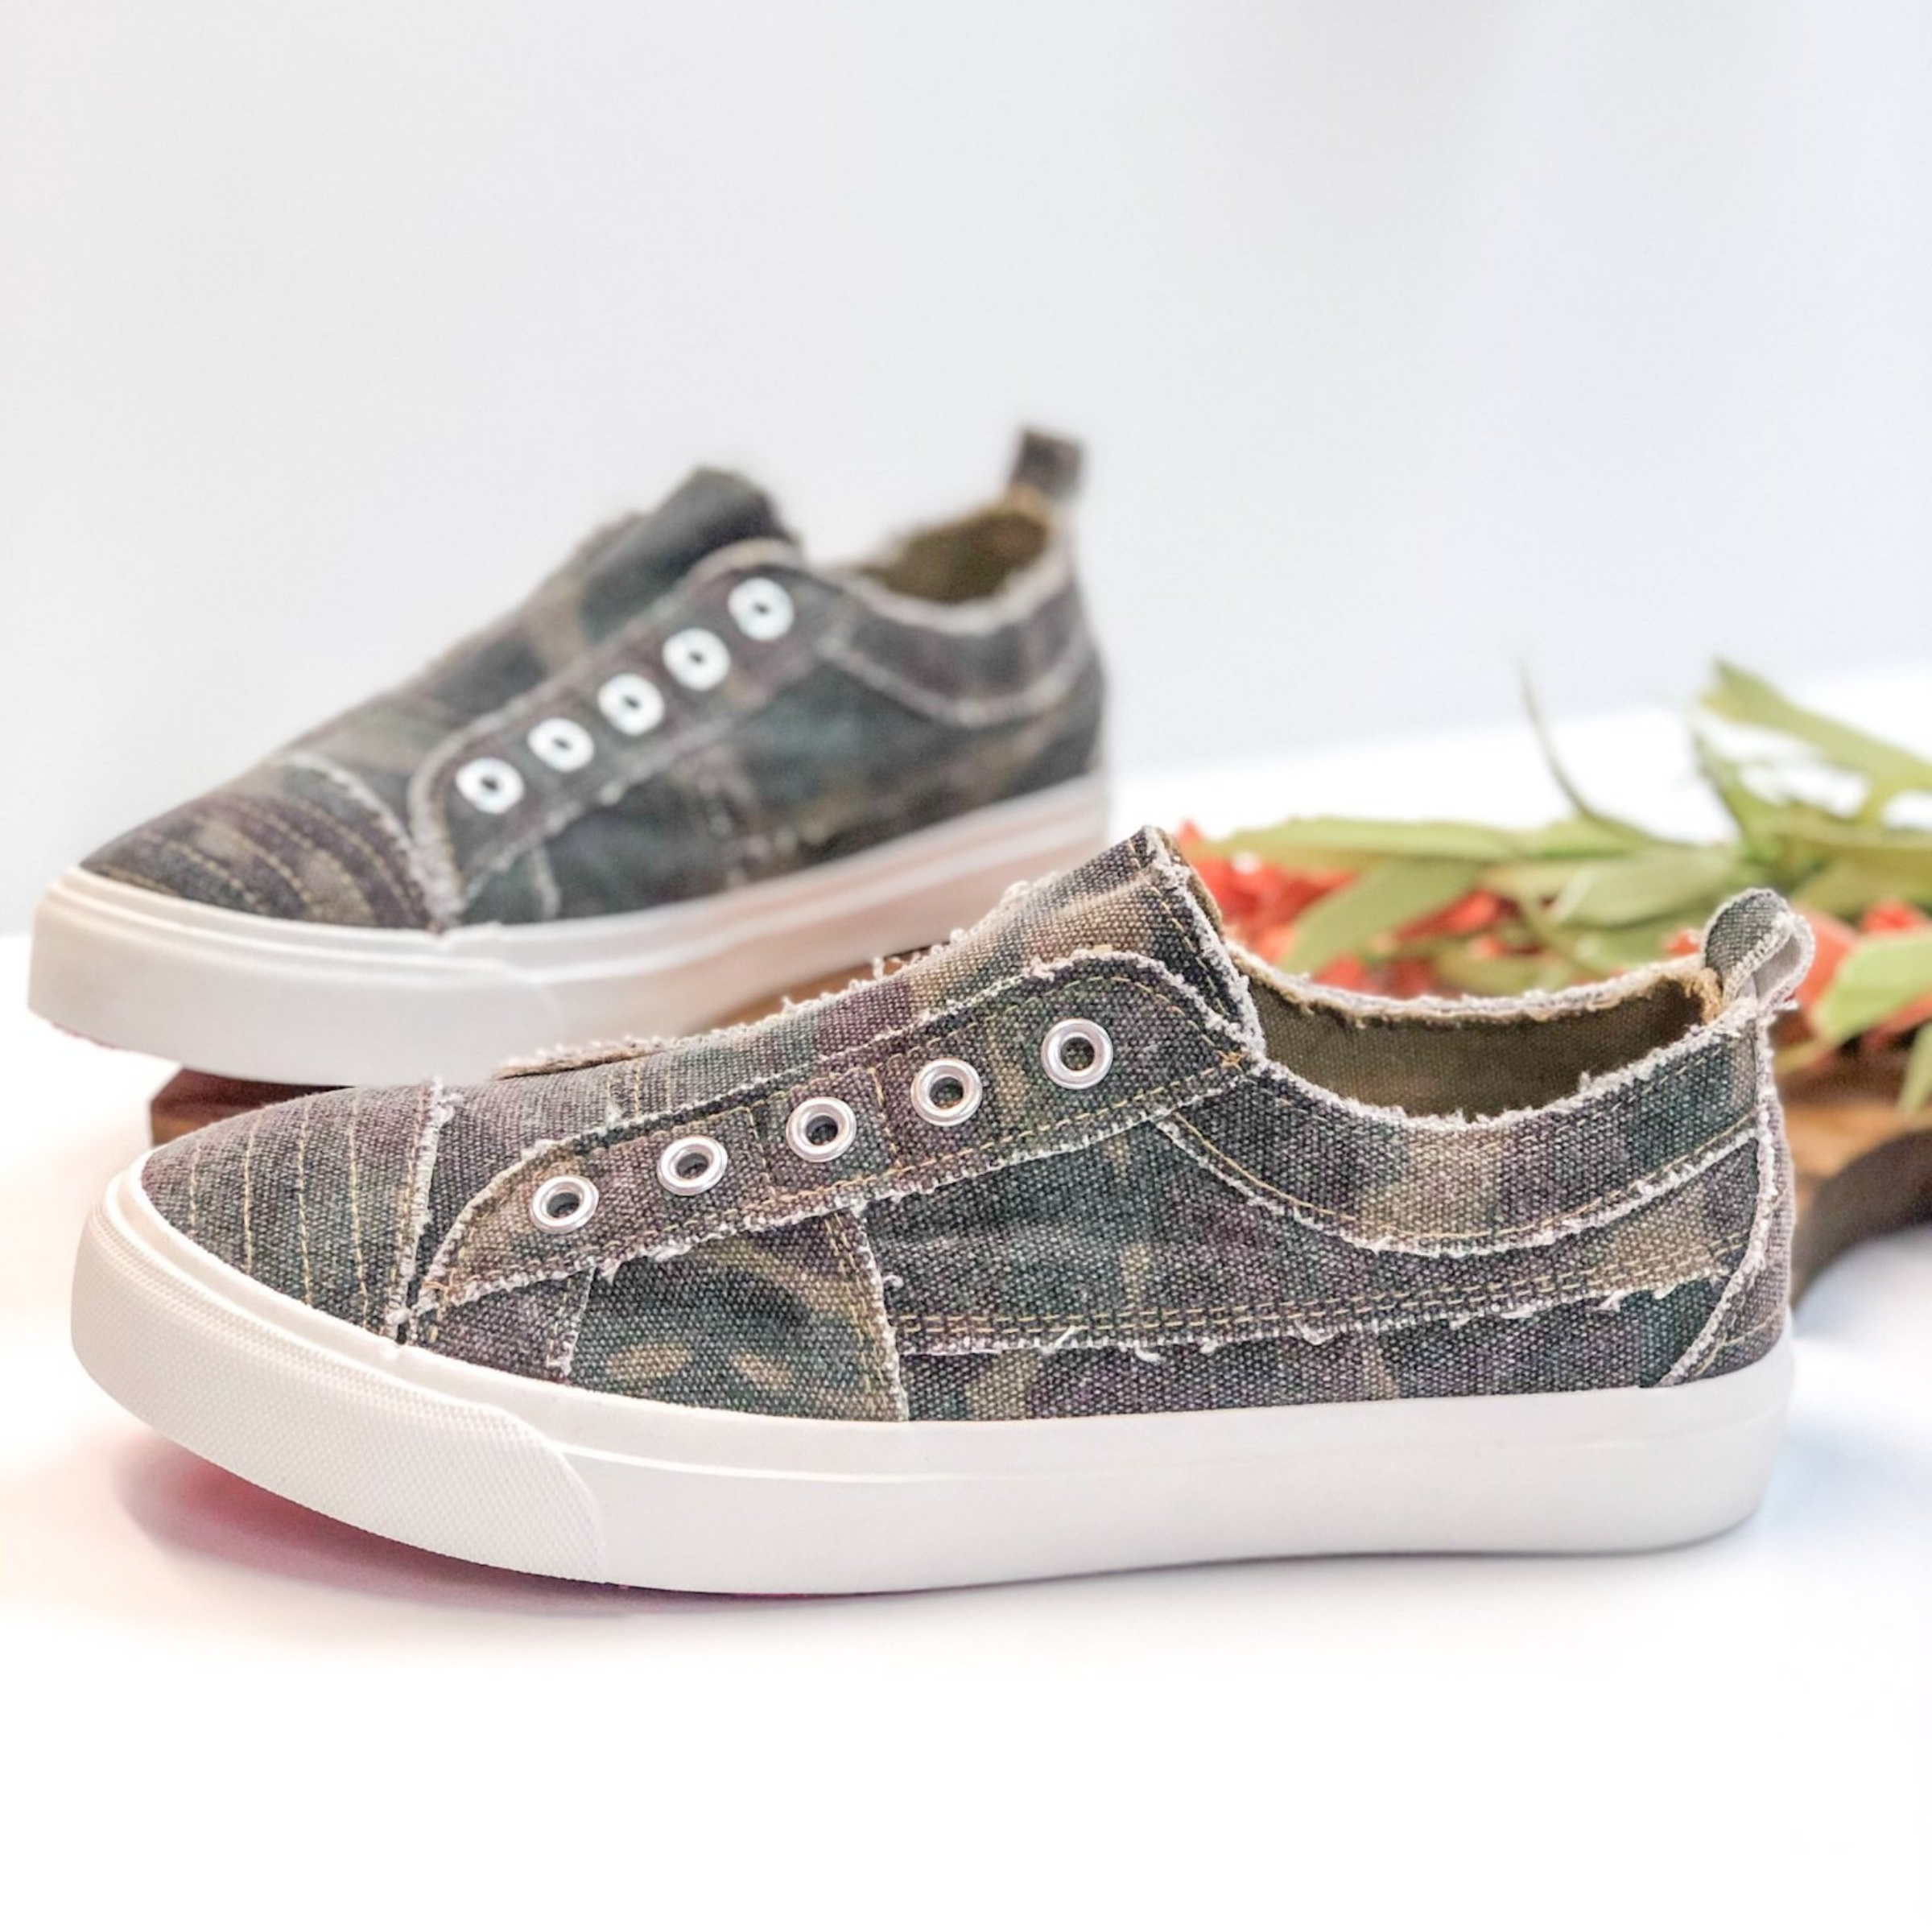 Image of Corky's | Babalu Slip On Sneakers in Camo